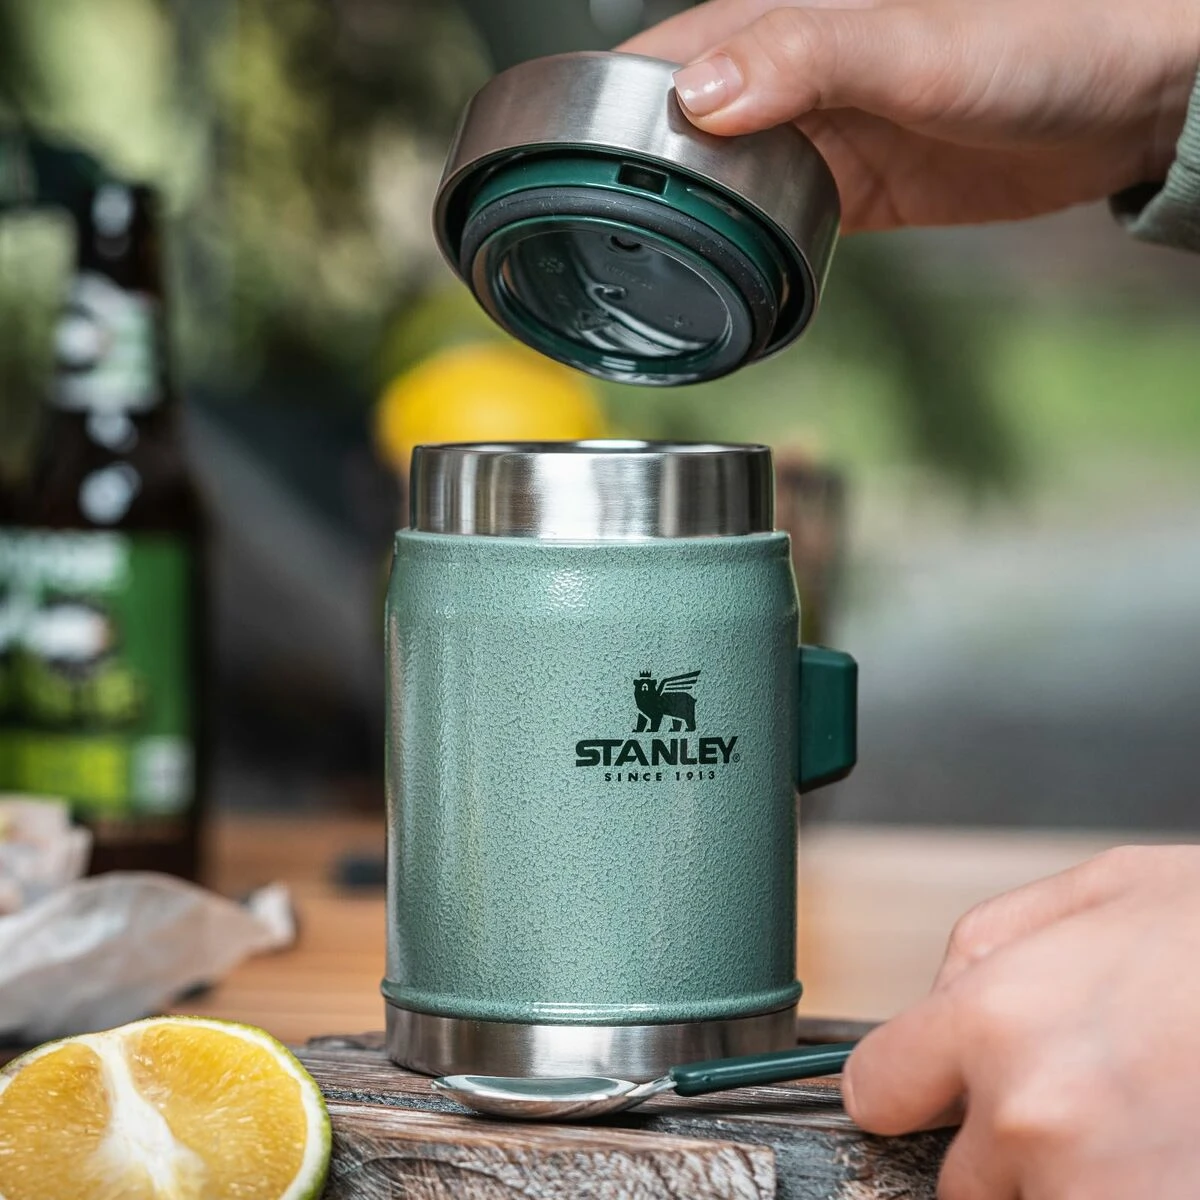 Hand opening a green Stanley insulated mug on blurred background.